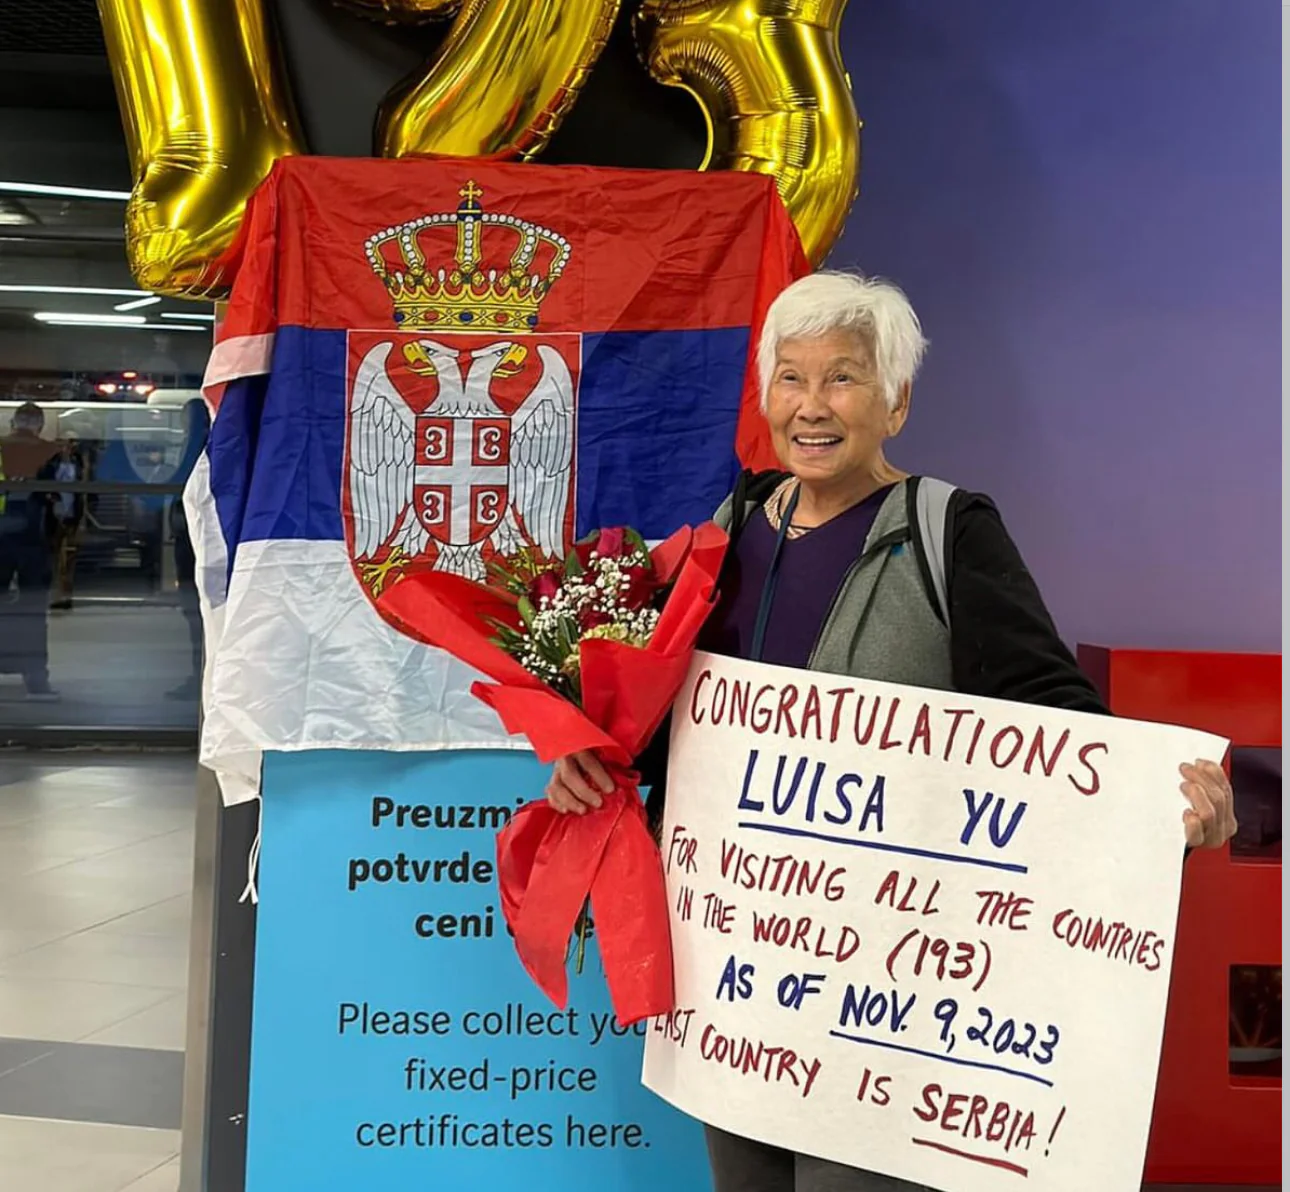 A picture of Luisa Yu, a Philipino traveller who visited every country in the world, holding her certificate upon her completion of this goal in her final country, Serbia. She is standing in front of a Serbian flag.